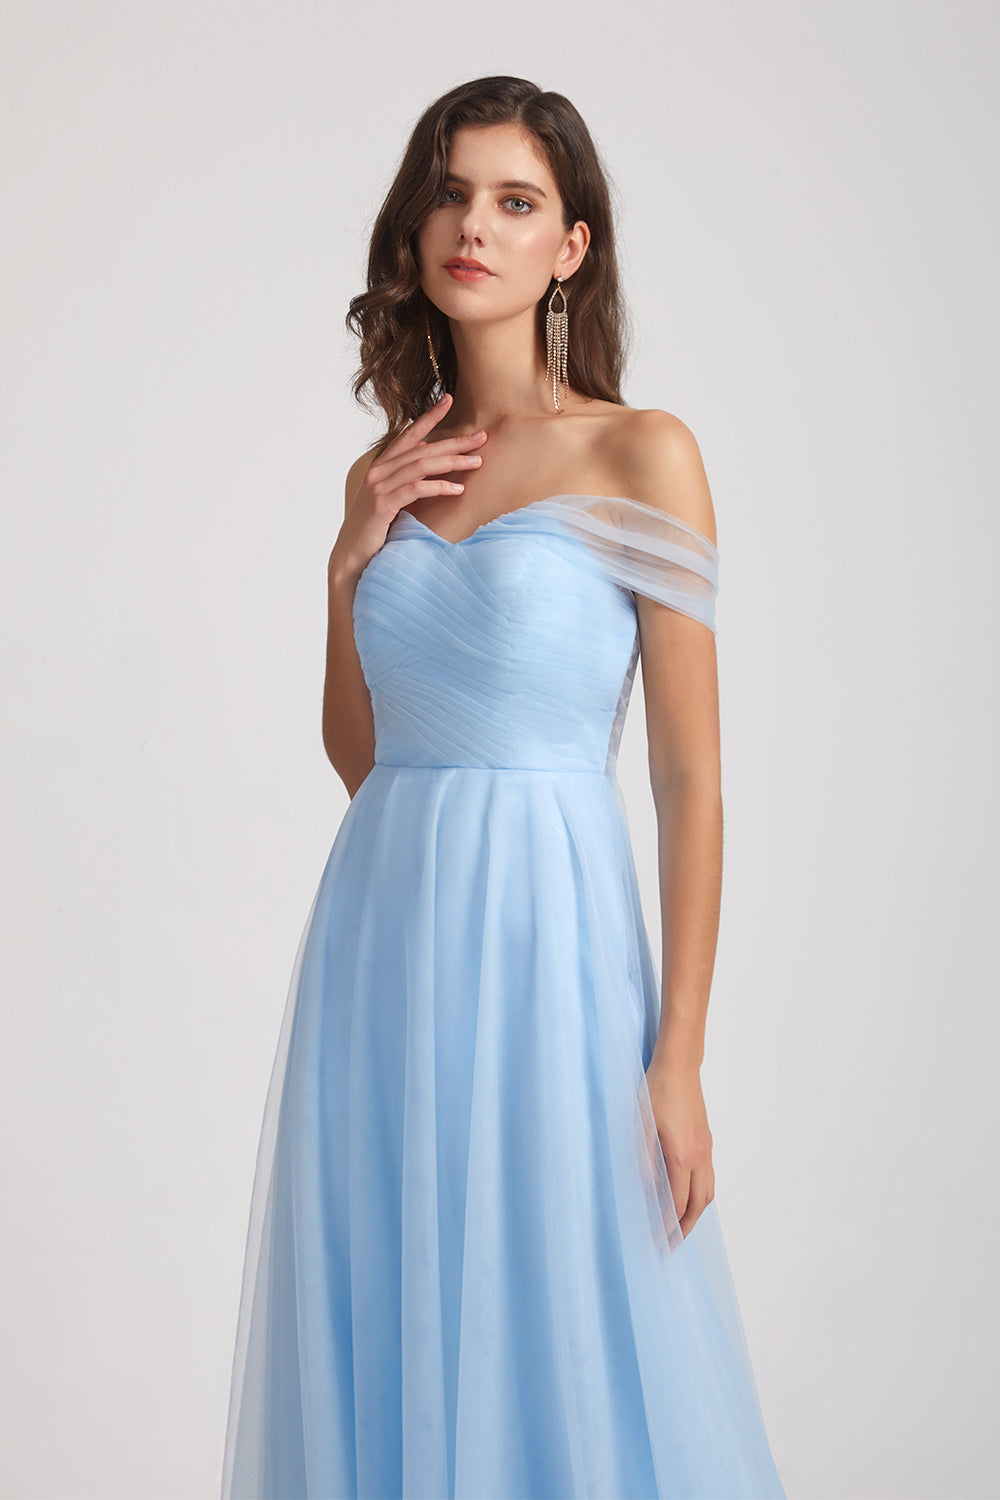 changeable tulle sky blue bridesmaid dress